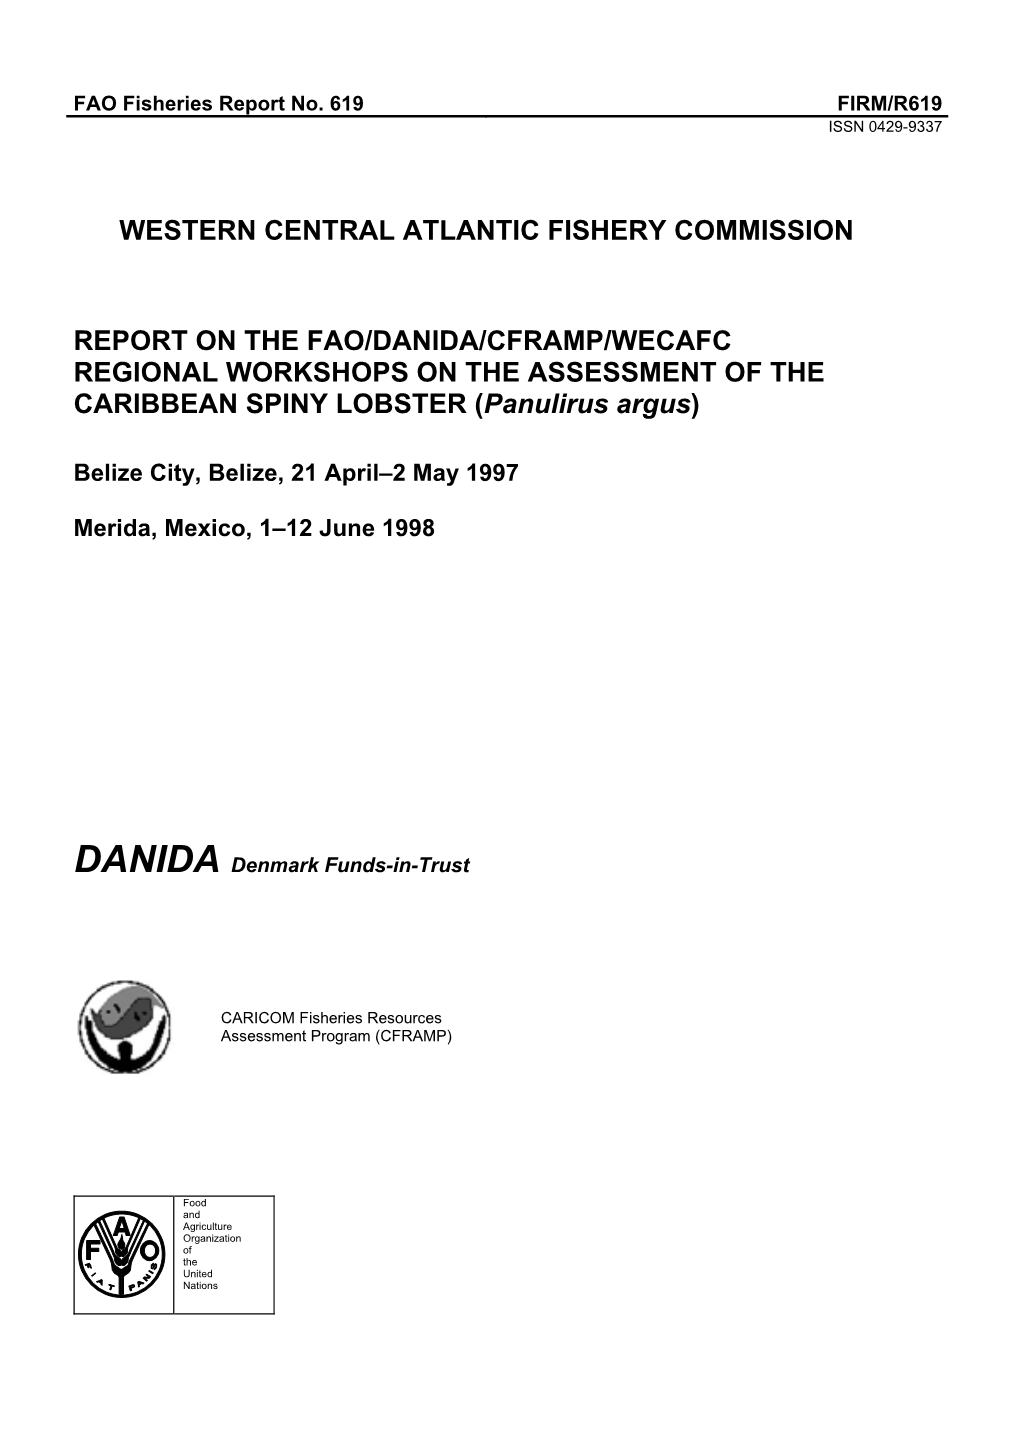 Western Central Atlantic Fishery Commission